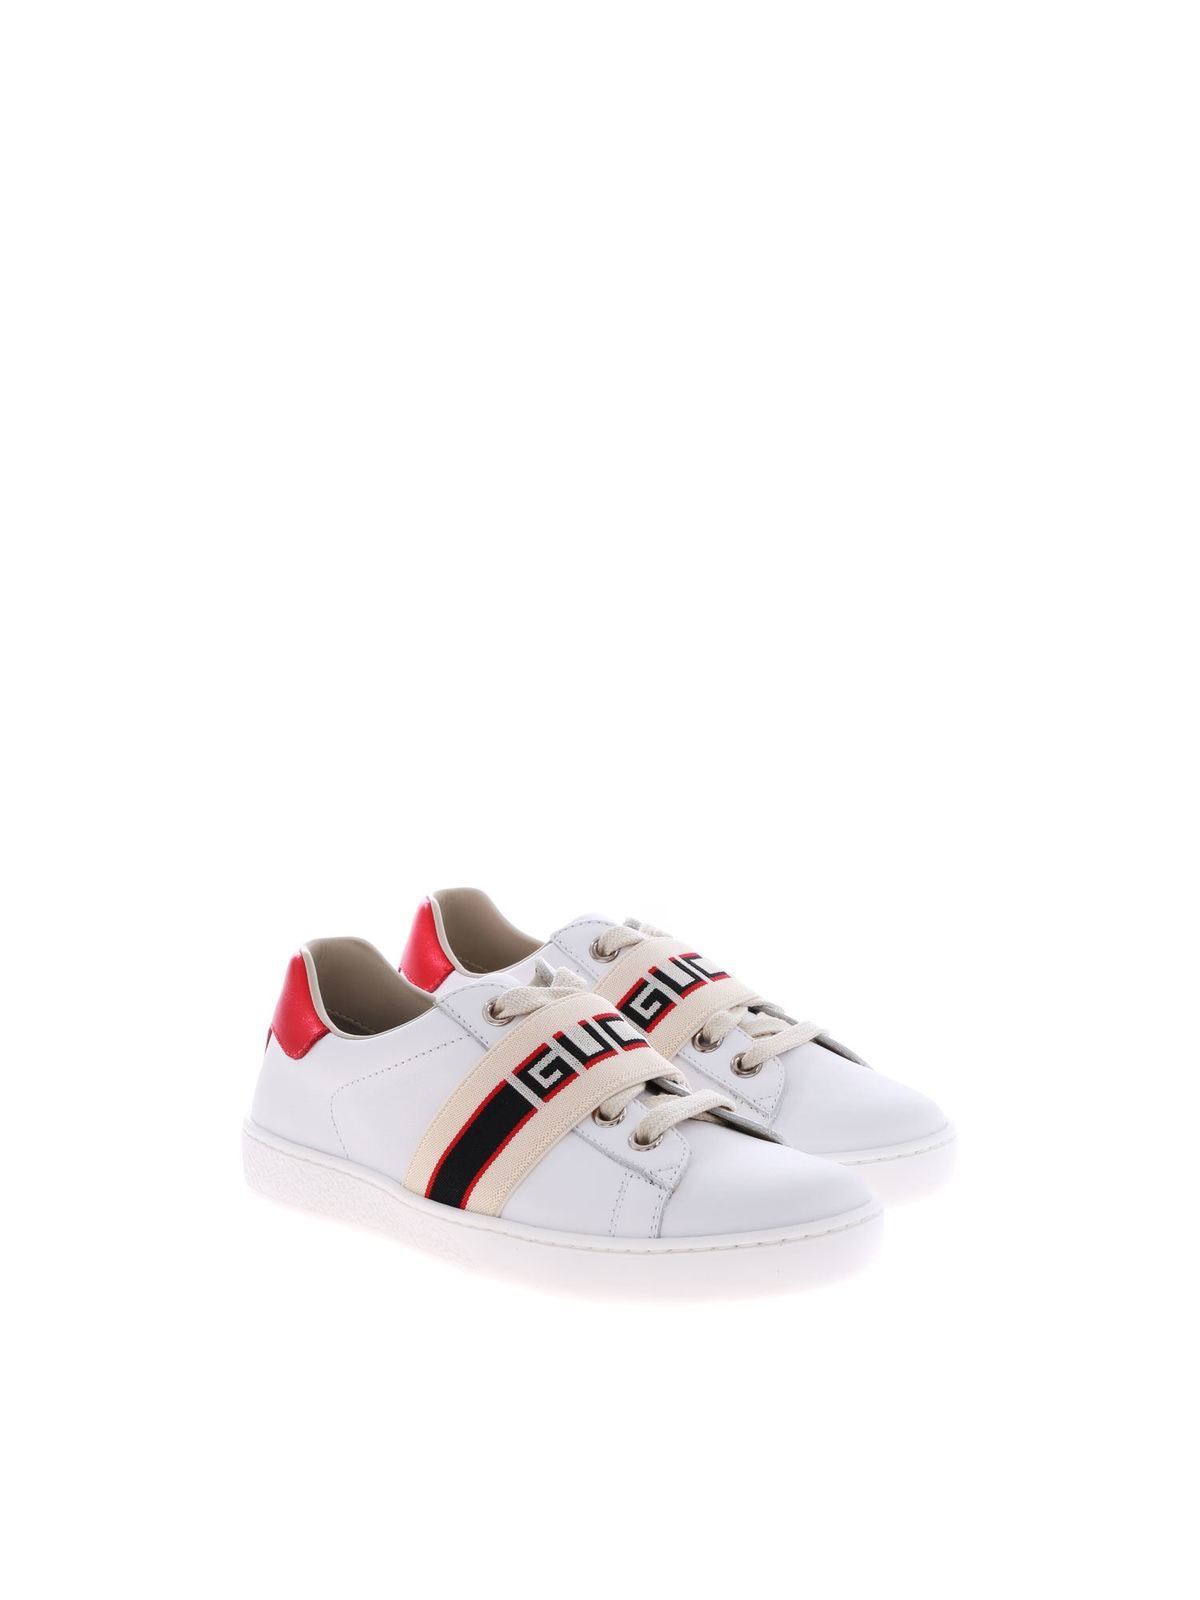 gucci band trainers